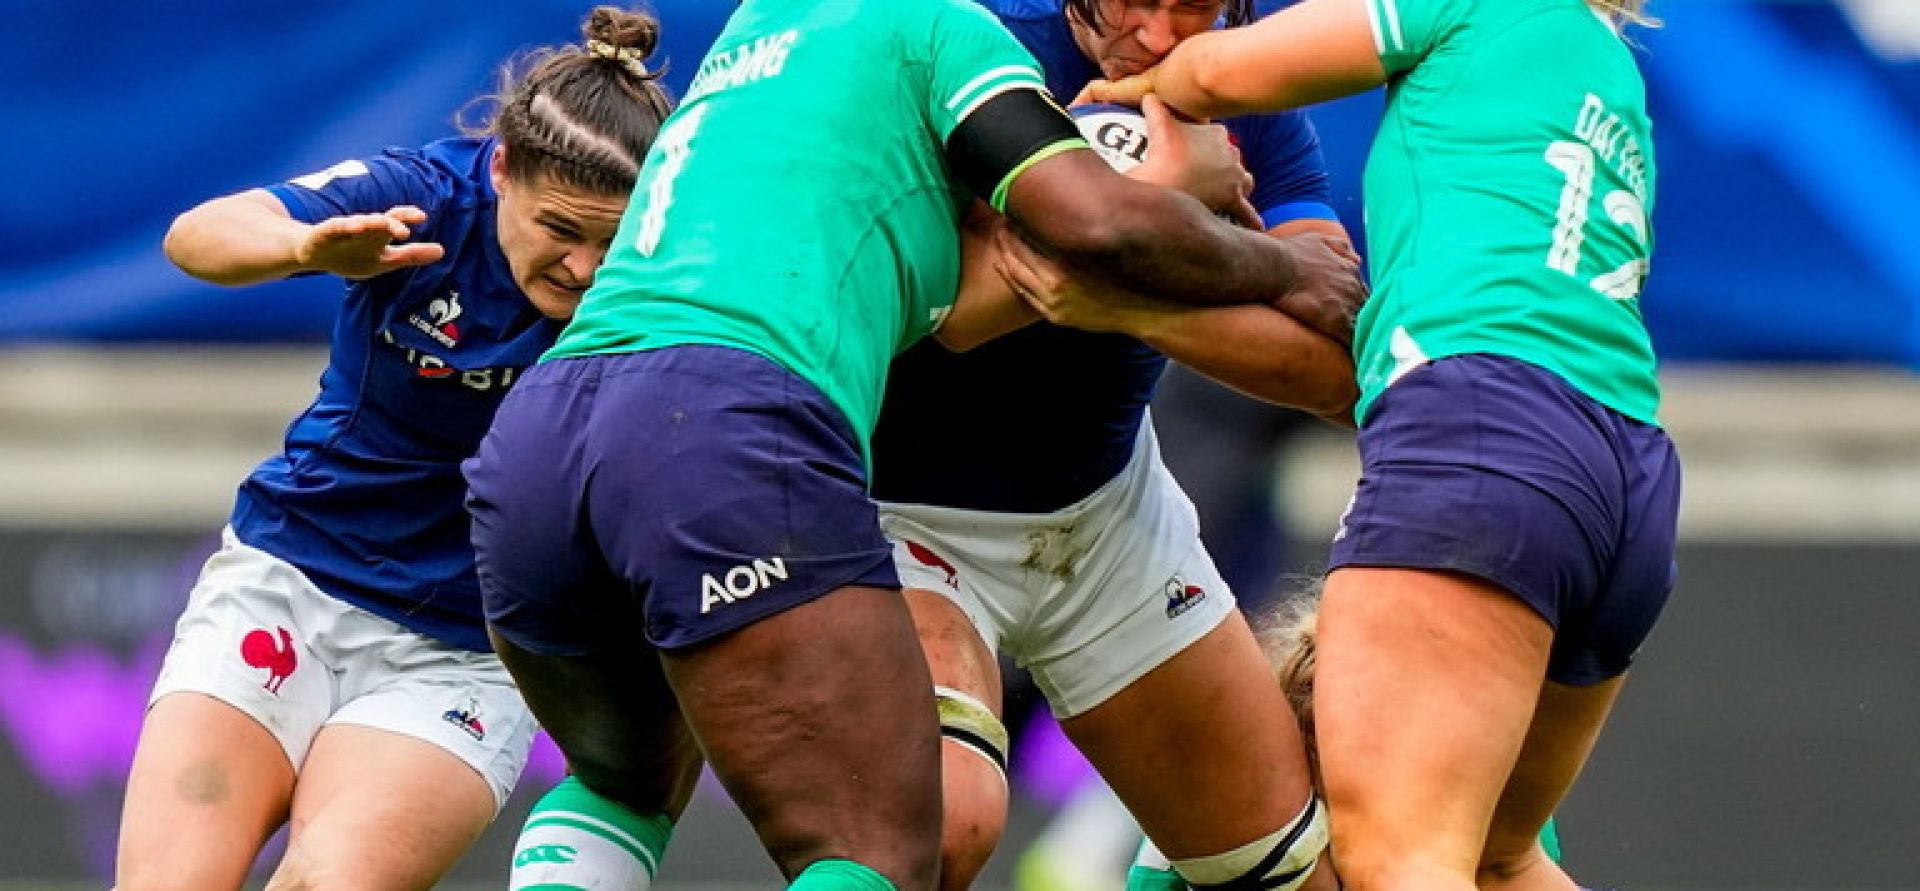 Eimear Considine: Ireland Can Put Their Mark Back On This Competition With Italy Result